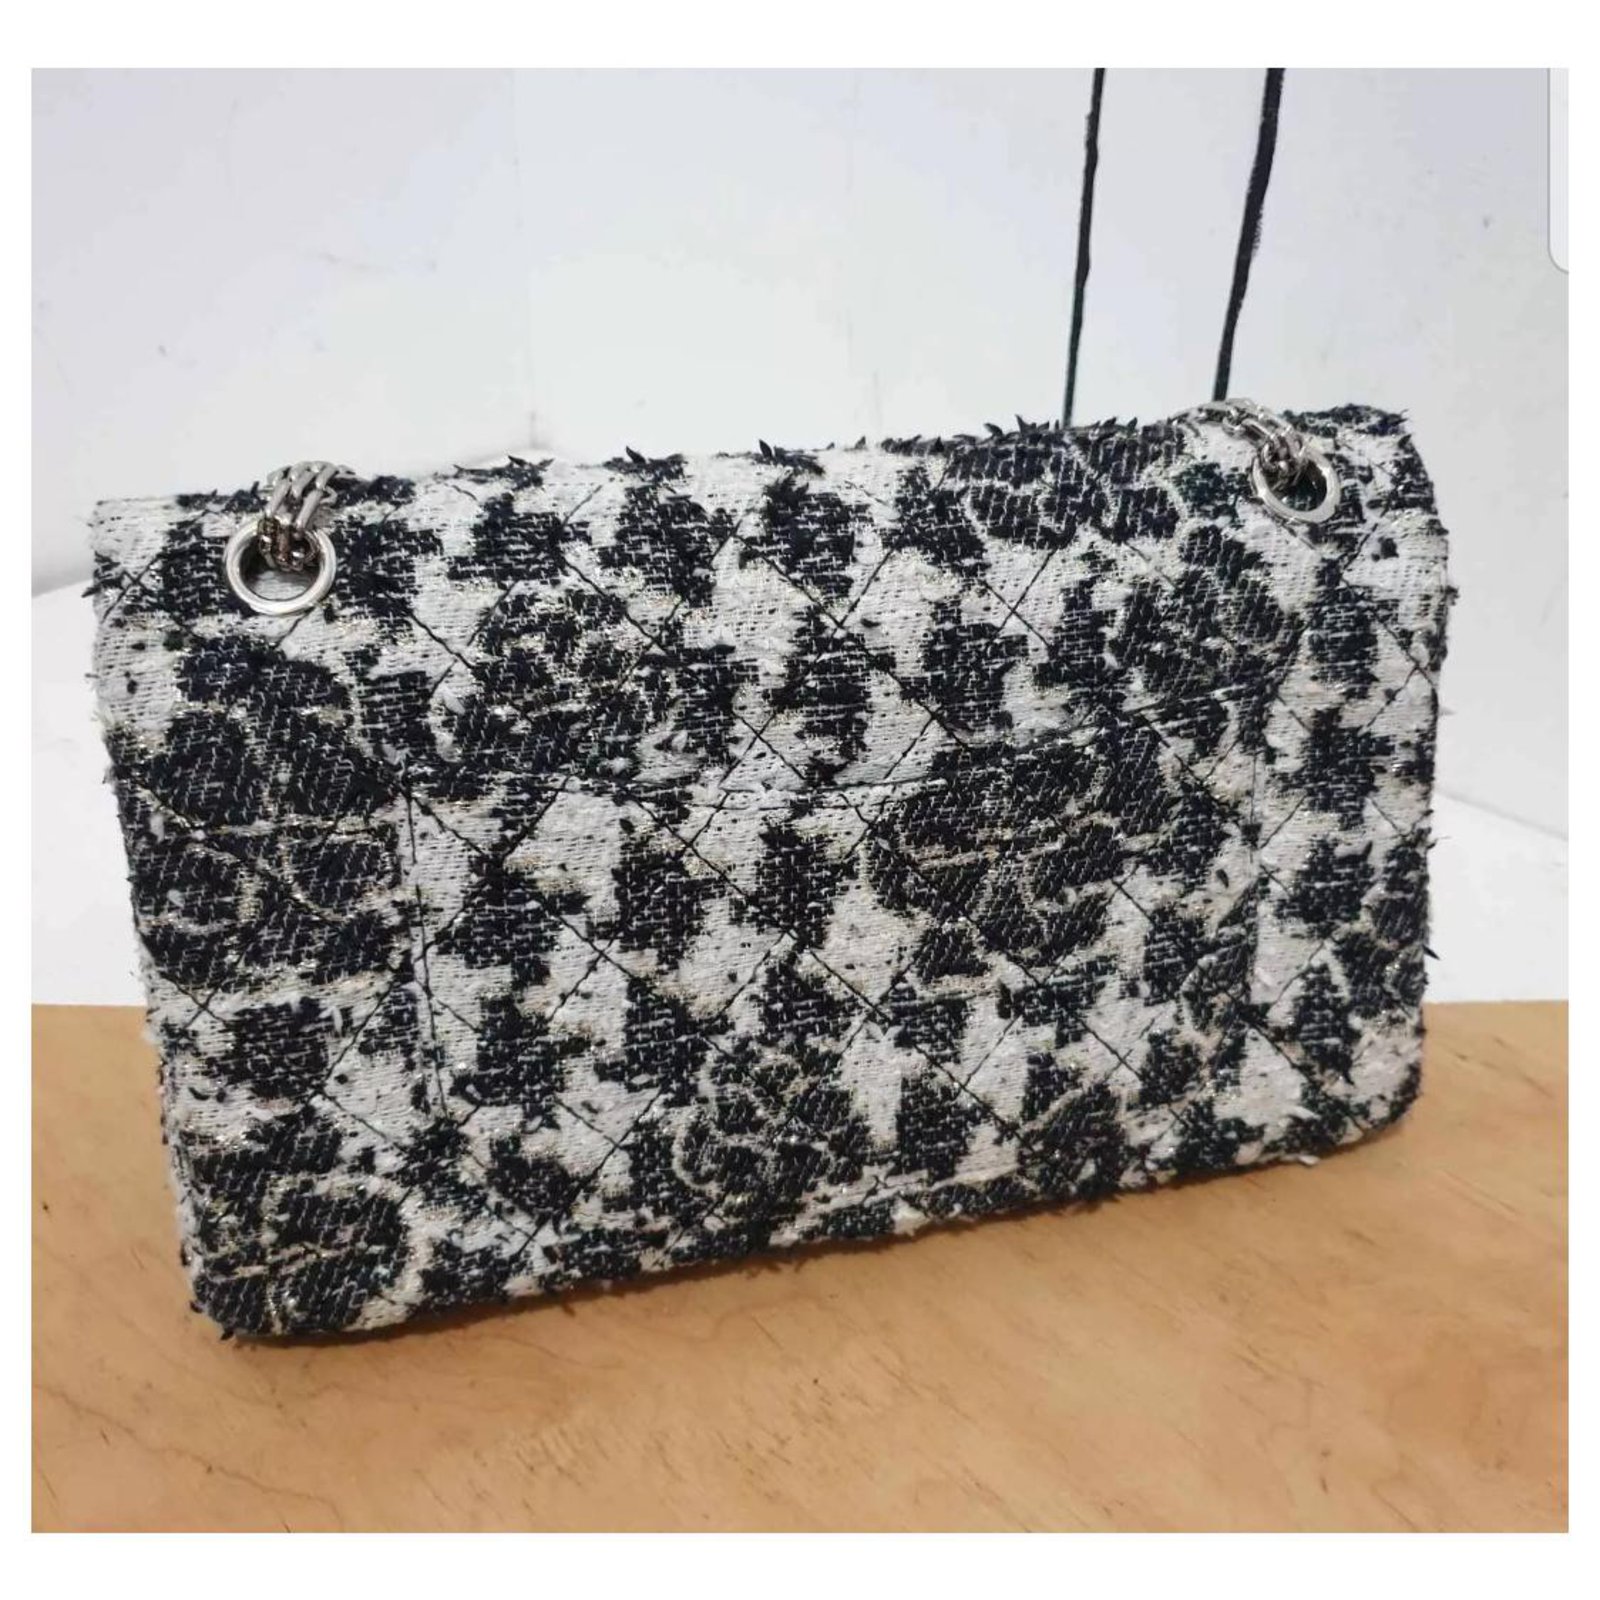 chanel tweed bag black and white